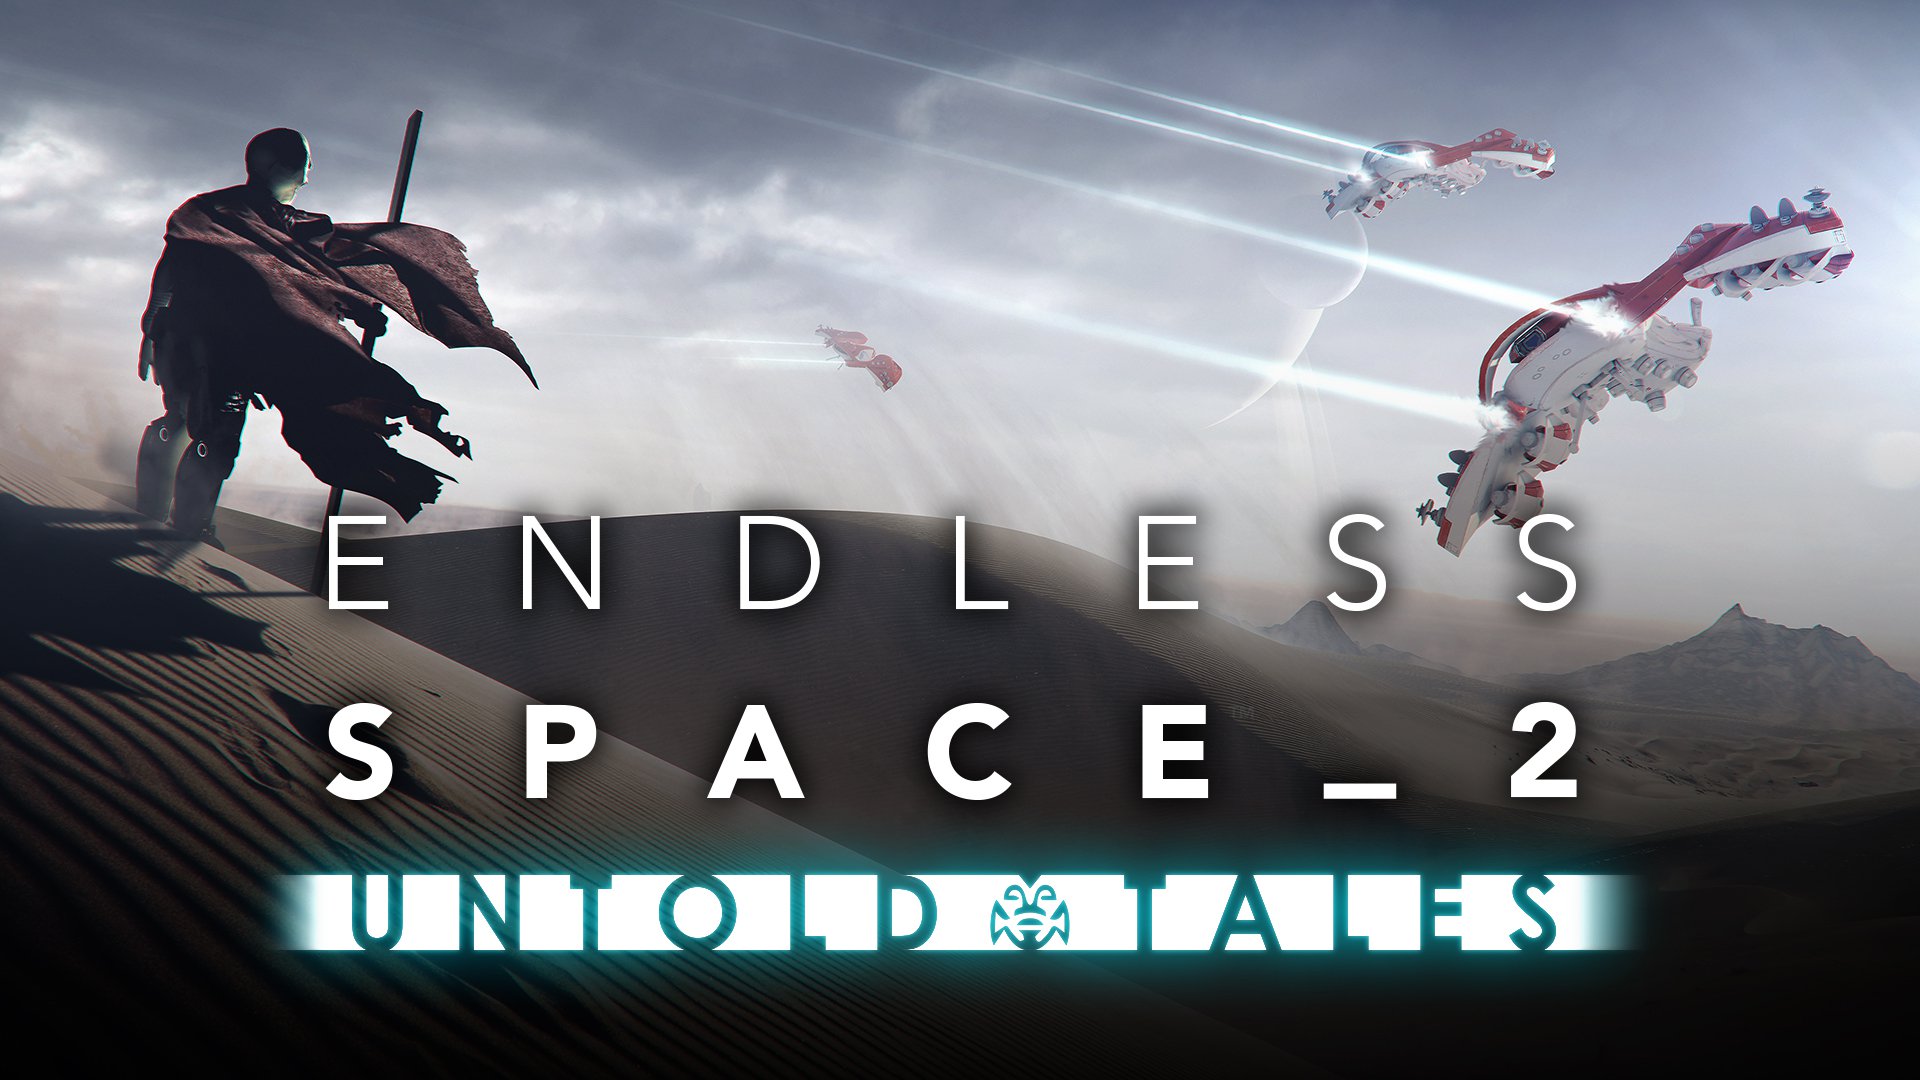 ESD Endless Space 2 Untold Tales 